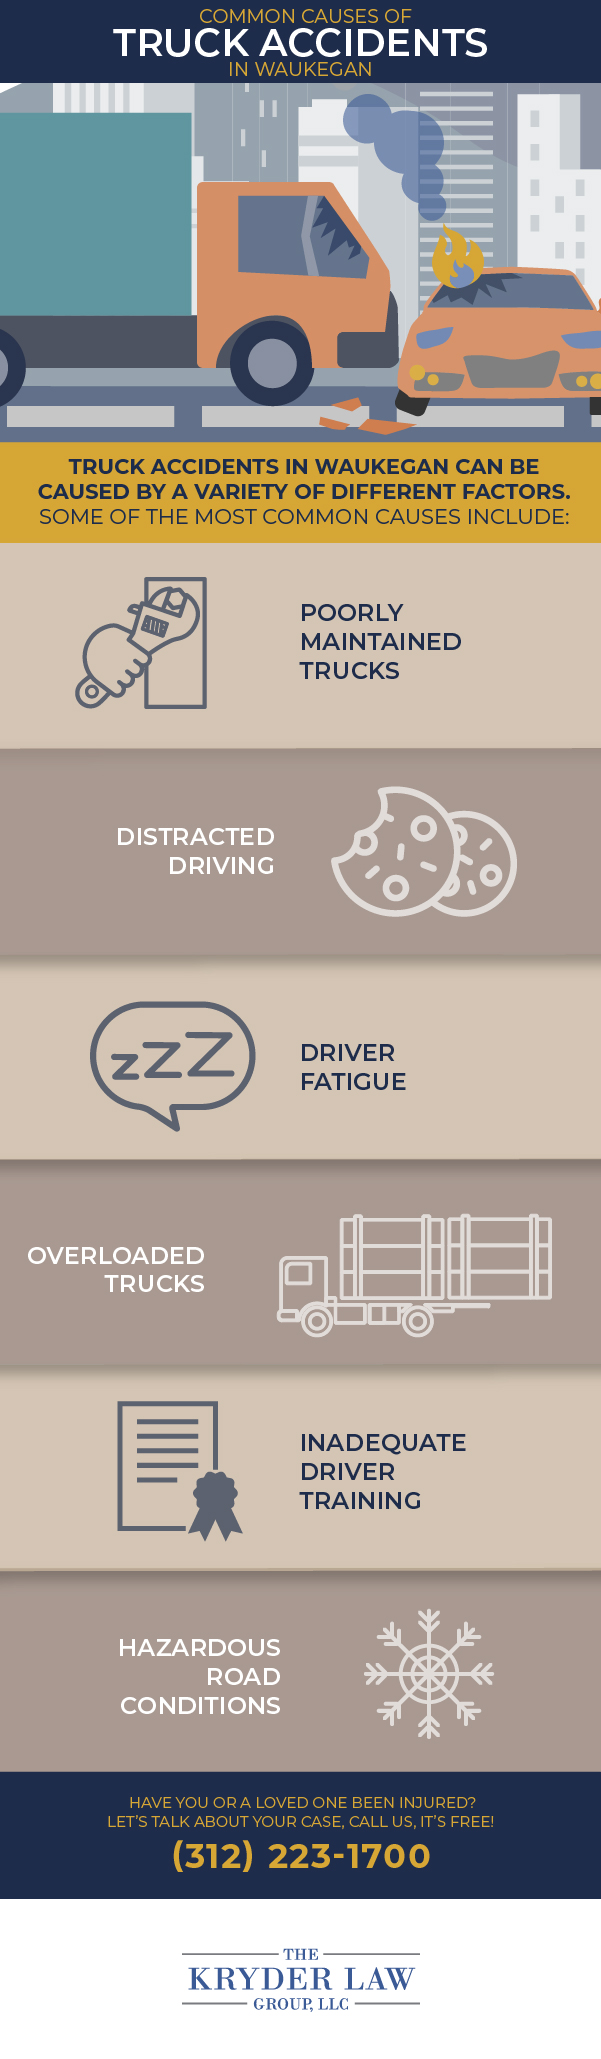 Common Causes of Truck Accidents in Waukegan